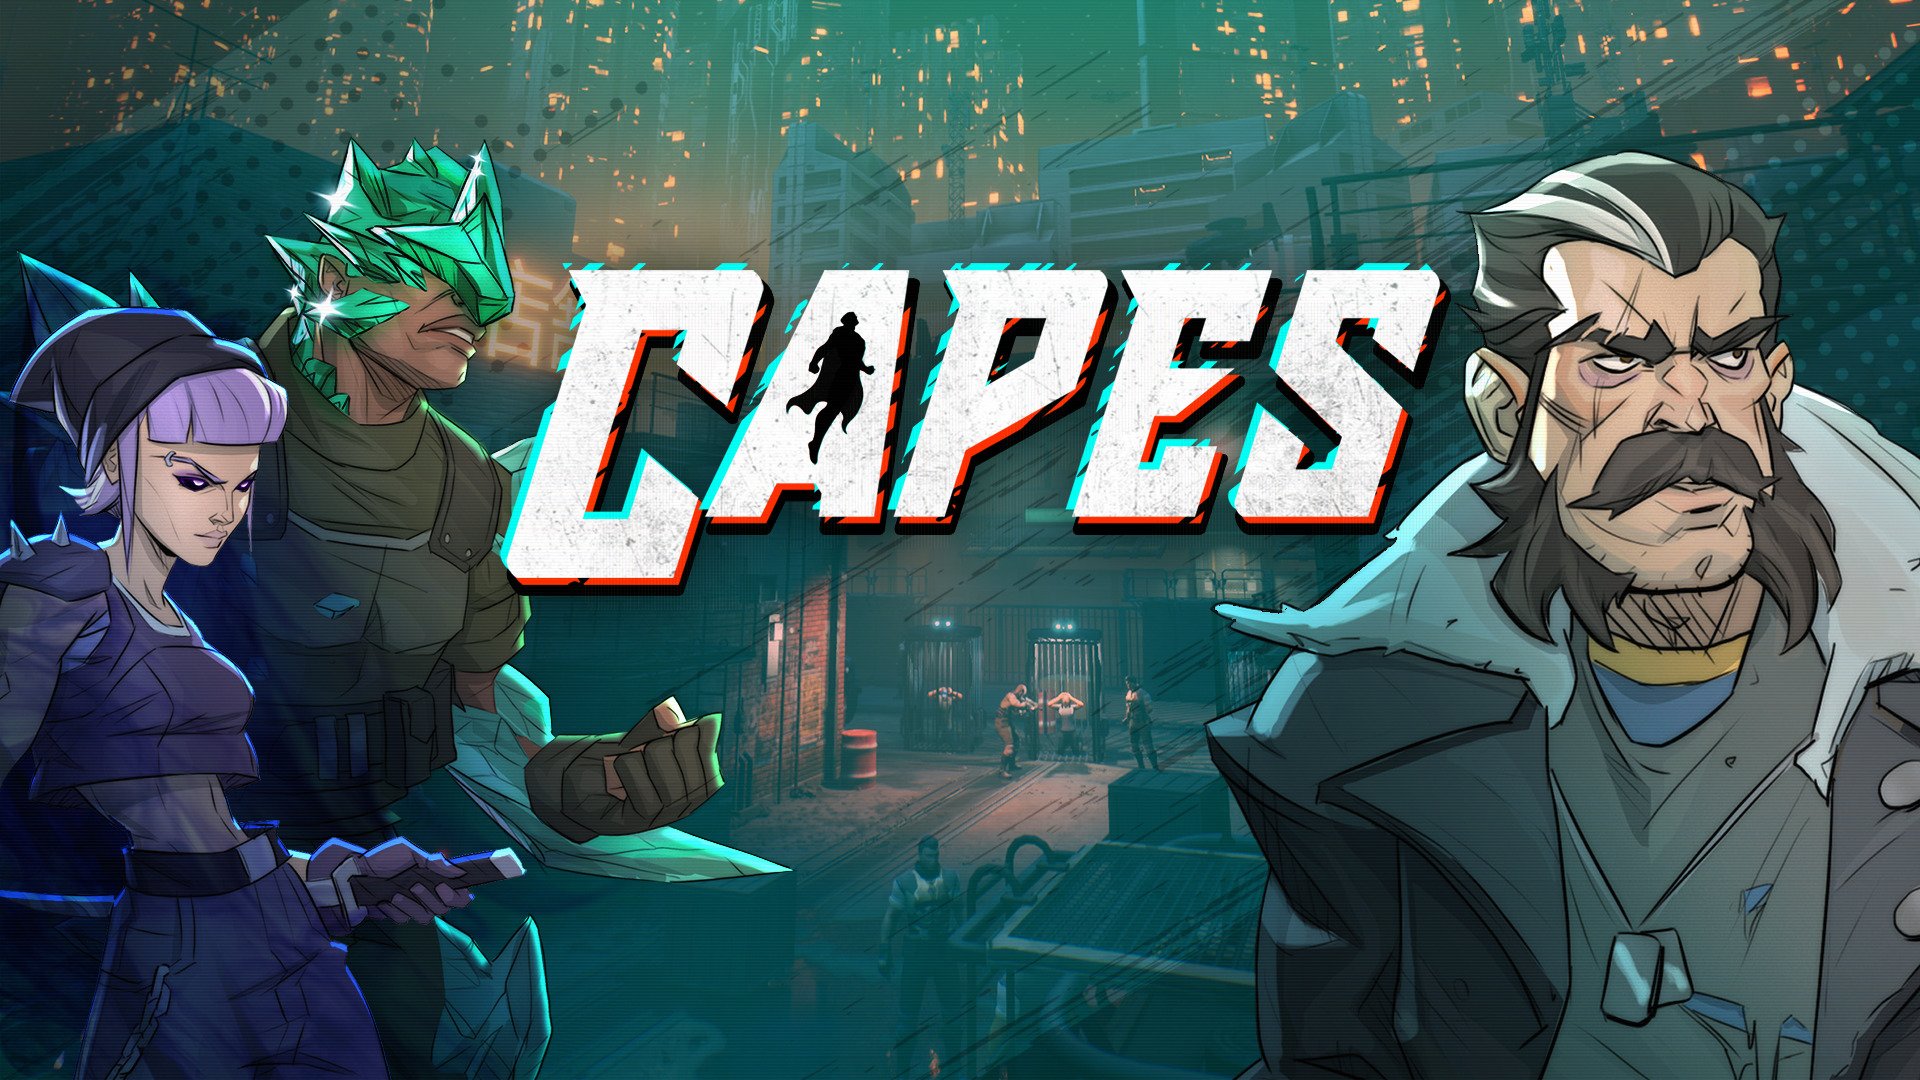 Capes Tactical Strategy Game